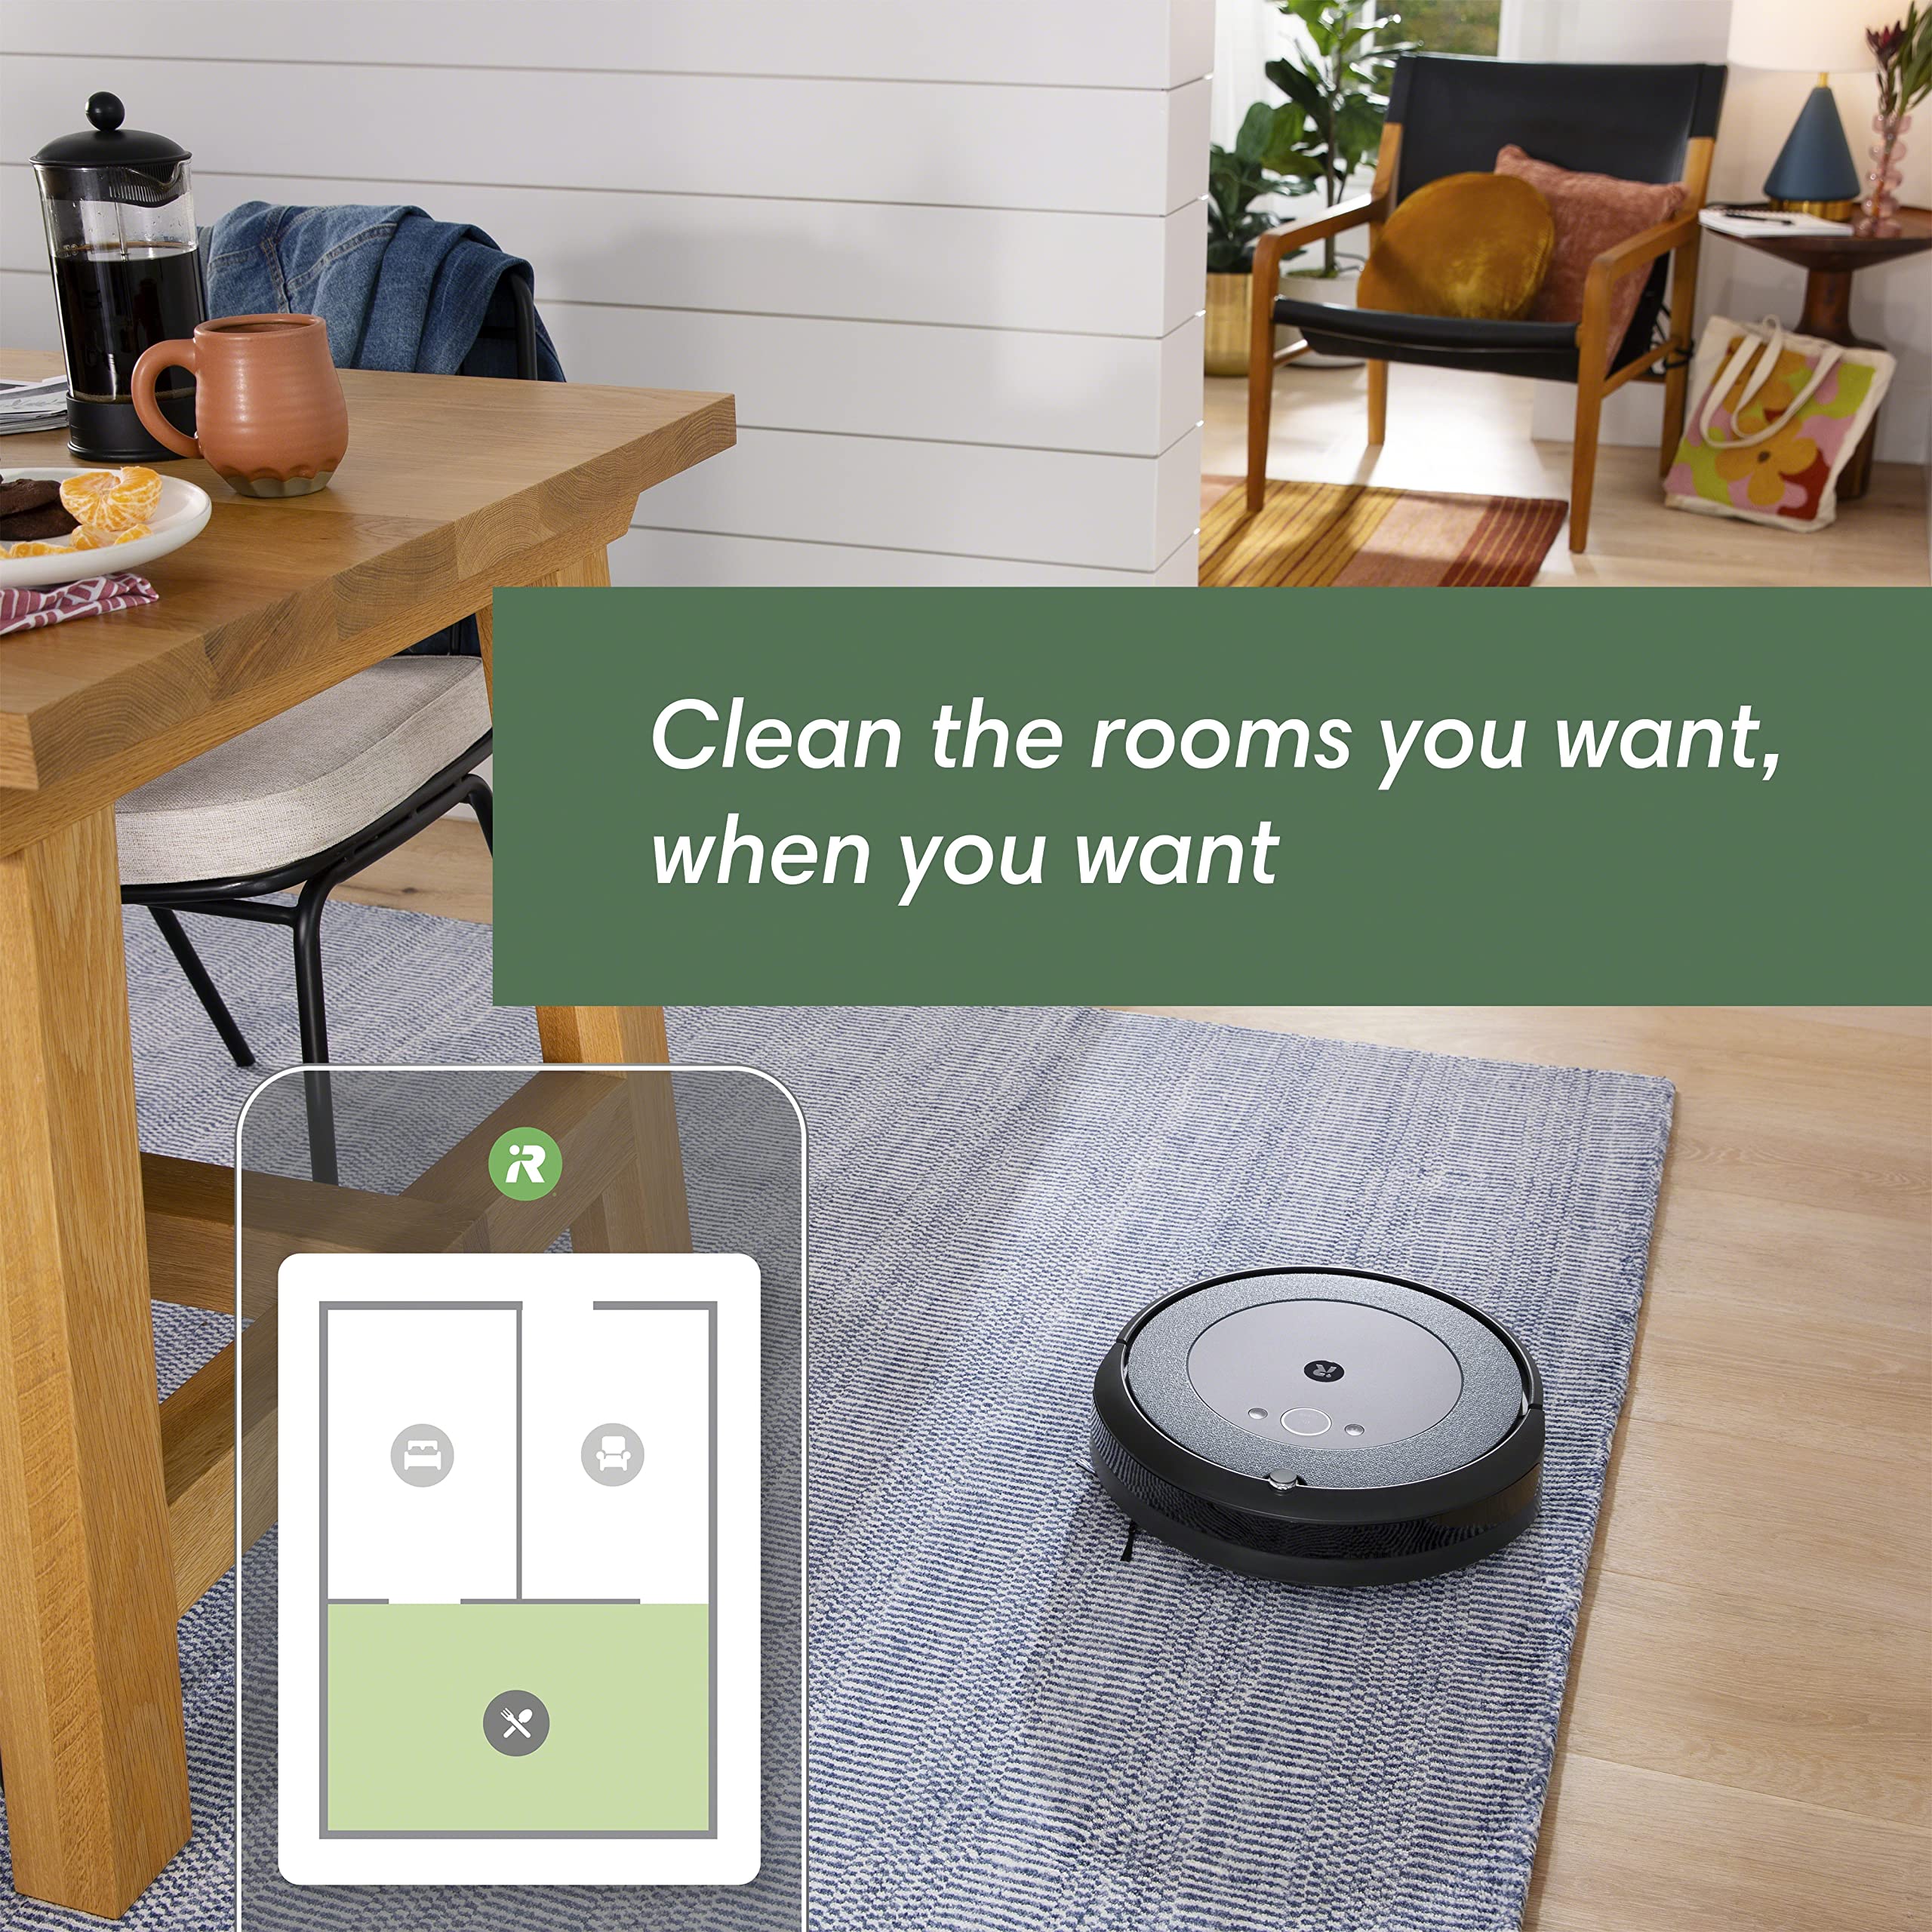 iRobot Roomba i4+ EVO (4552) Self Emptying Robot Vacuum - Empties Itself for up to 60 Days, Clean by Room with Smart Mapping, Compatible with Alexa, Ideal for Pet Hair, Carpets